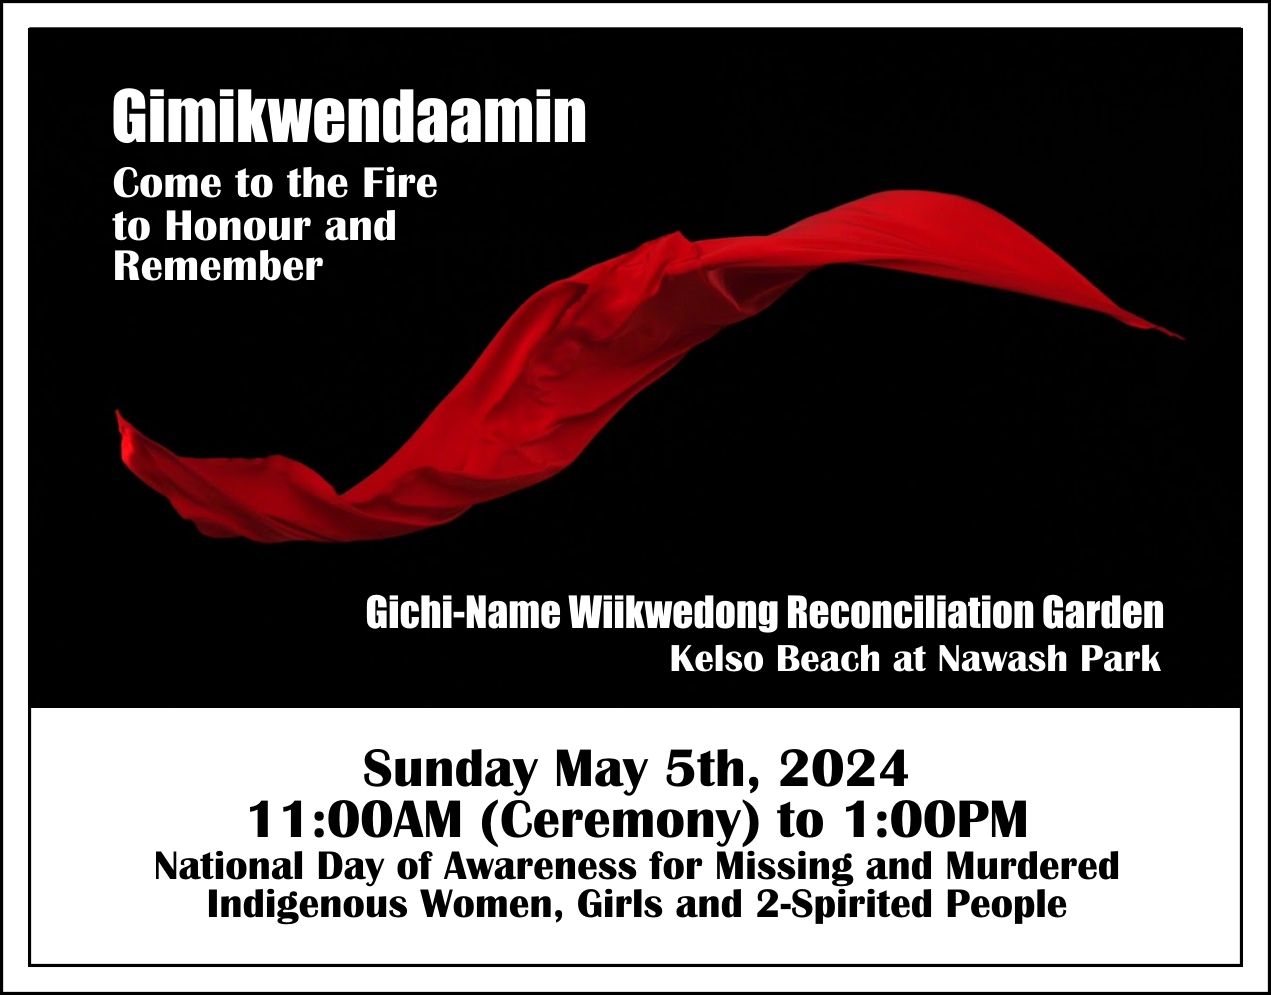 Event image Gimikwendaamin (We are remembering)